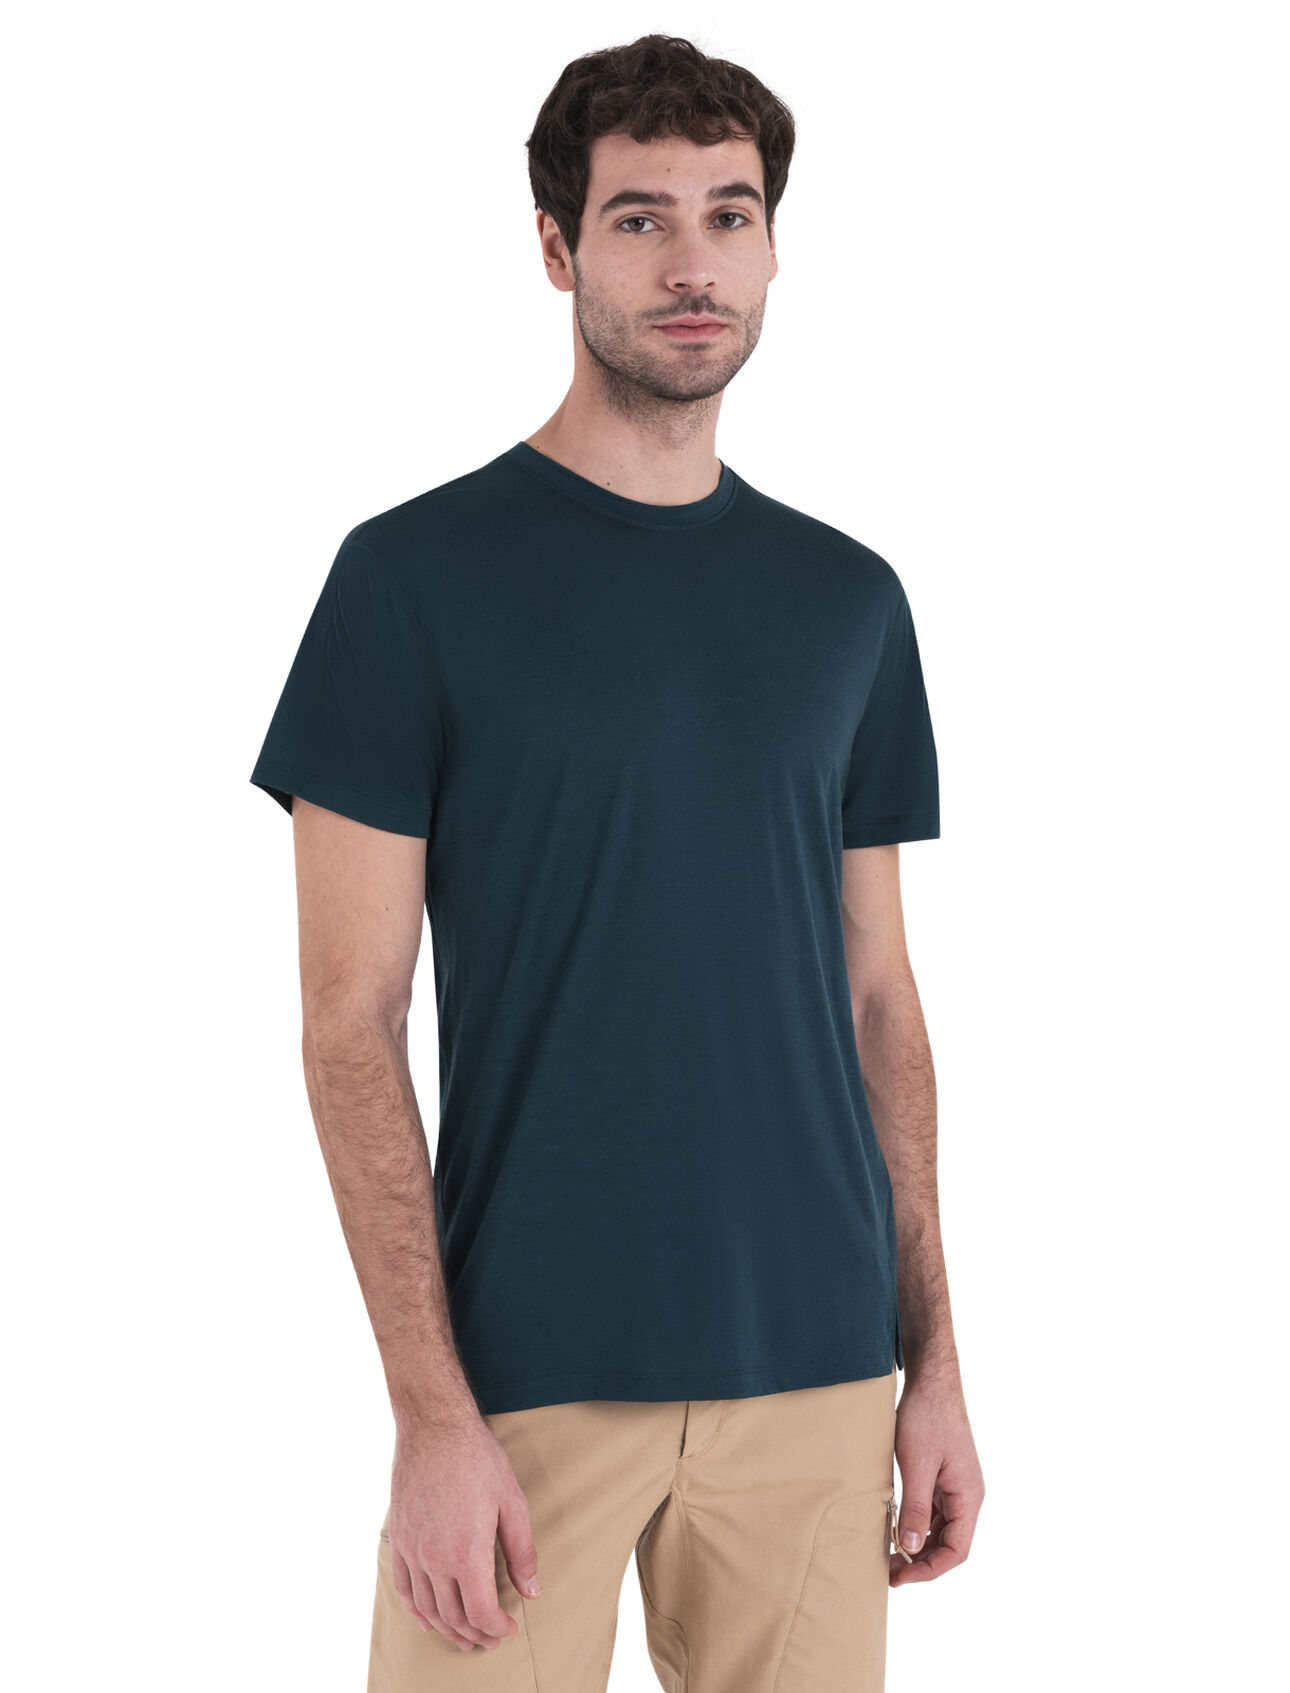 Mens 150 MerinoFine™ Ace T-Shirt A lightweight, go-anywhere performance tee designed for high-intensity movement, the MerinoFine™ Ace Short Sleeve Tee naturally regulates body temperature and resists odours thanks to its 100% ultrafine merino wool fabric.